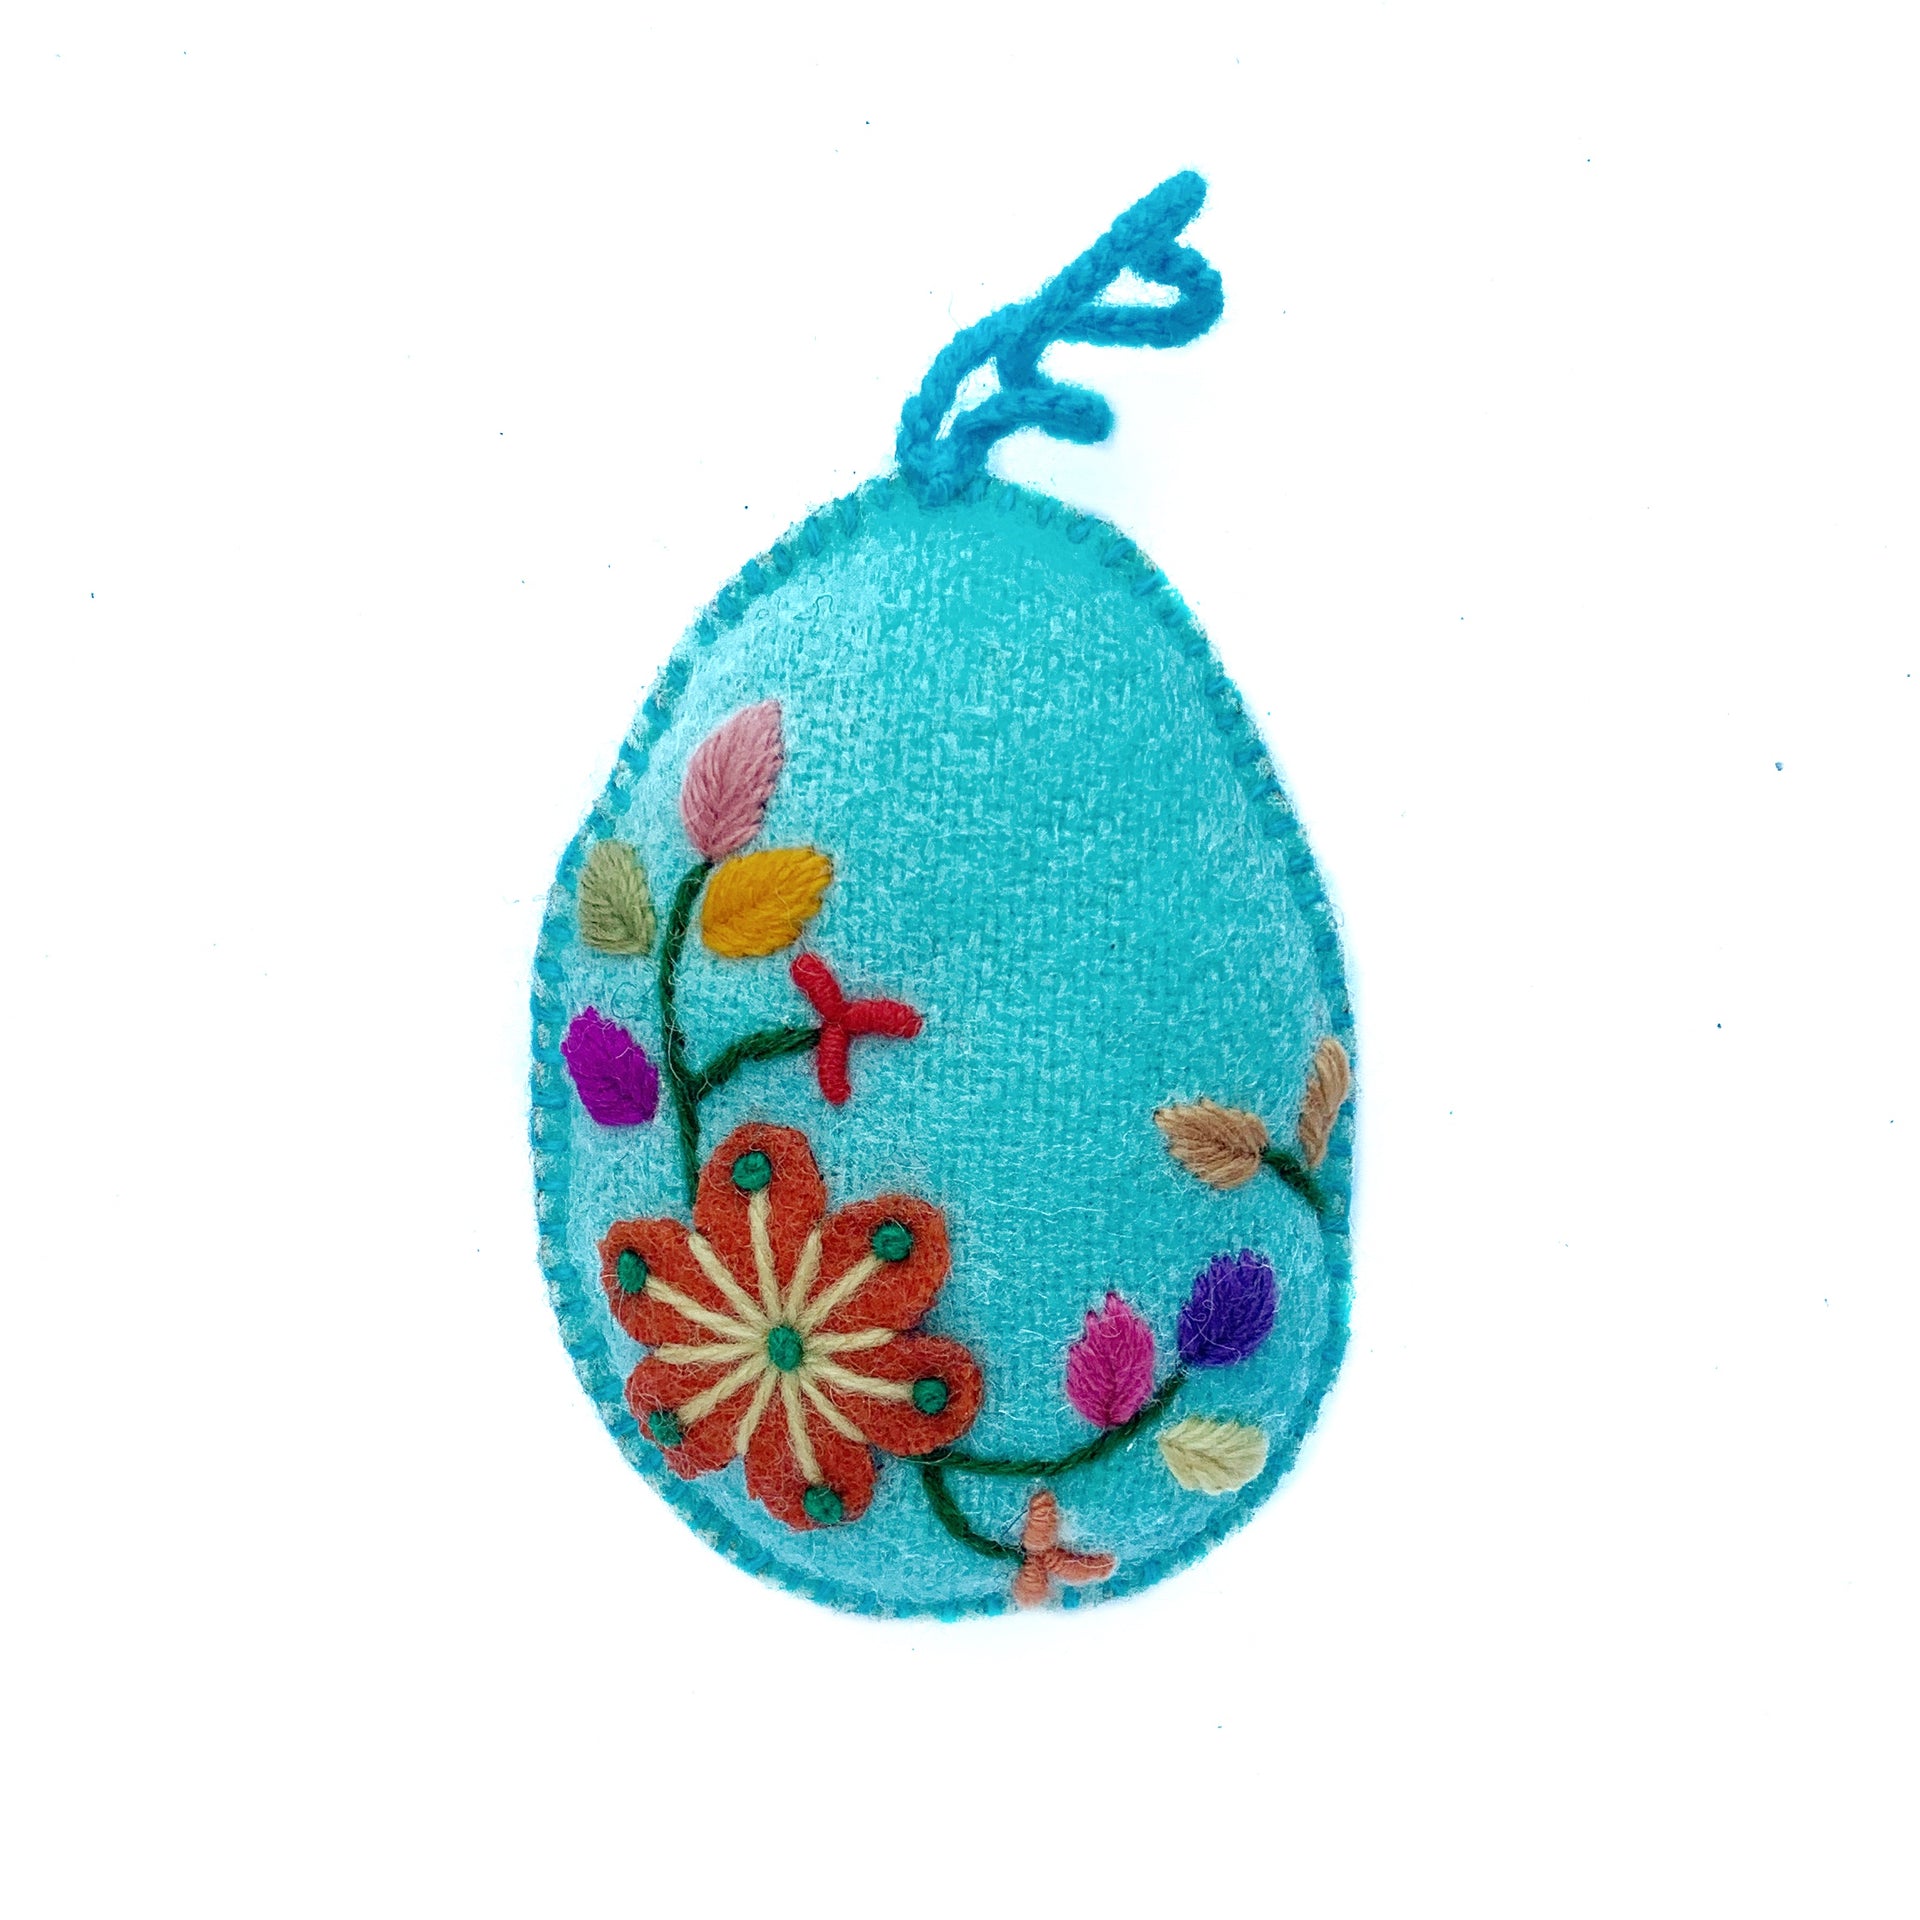 Soft blue pastel Easter egg ornament with hand embroidered flowers and designs.